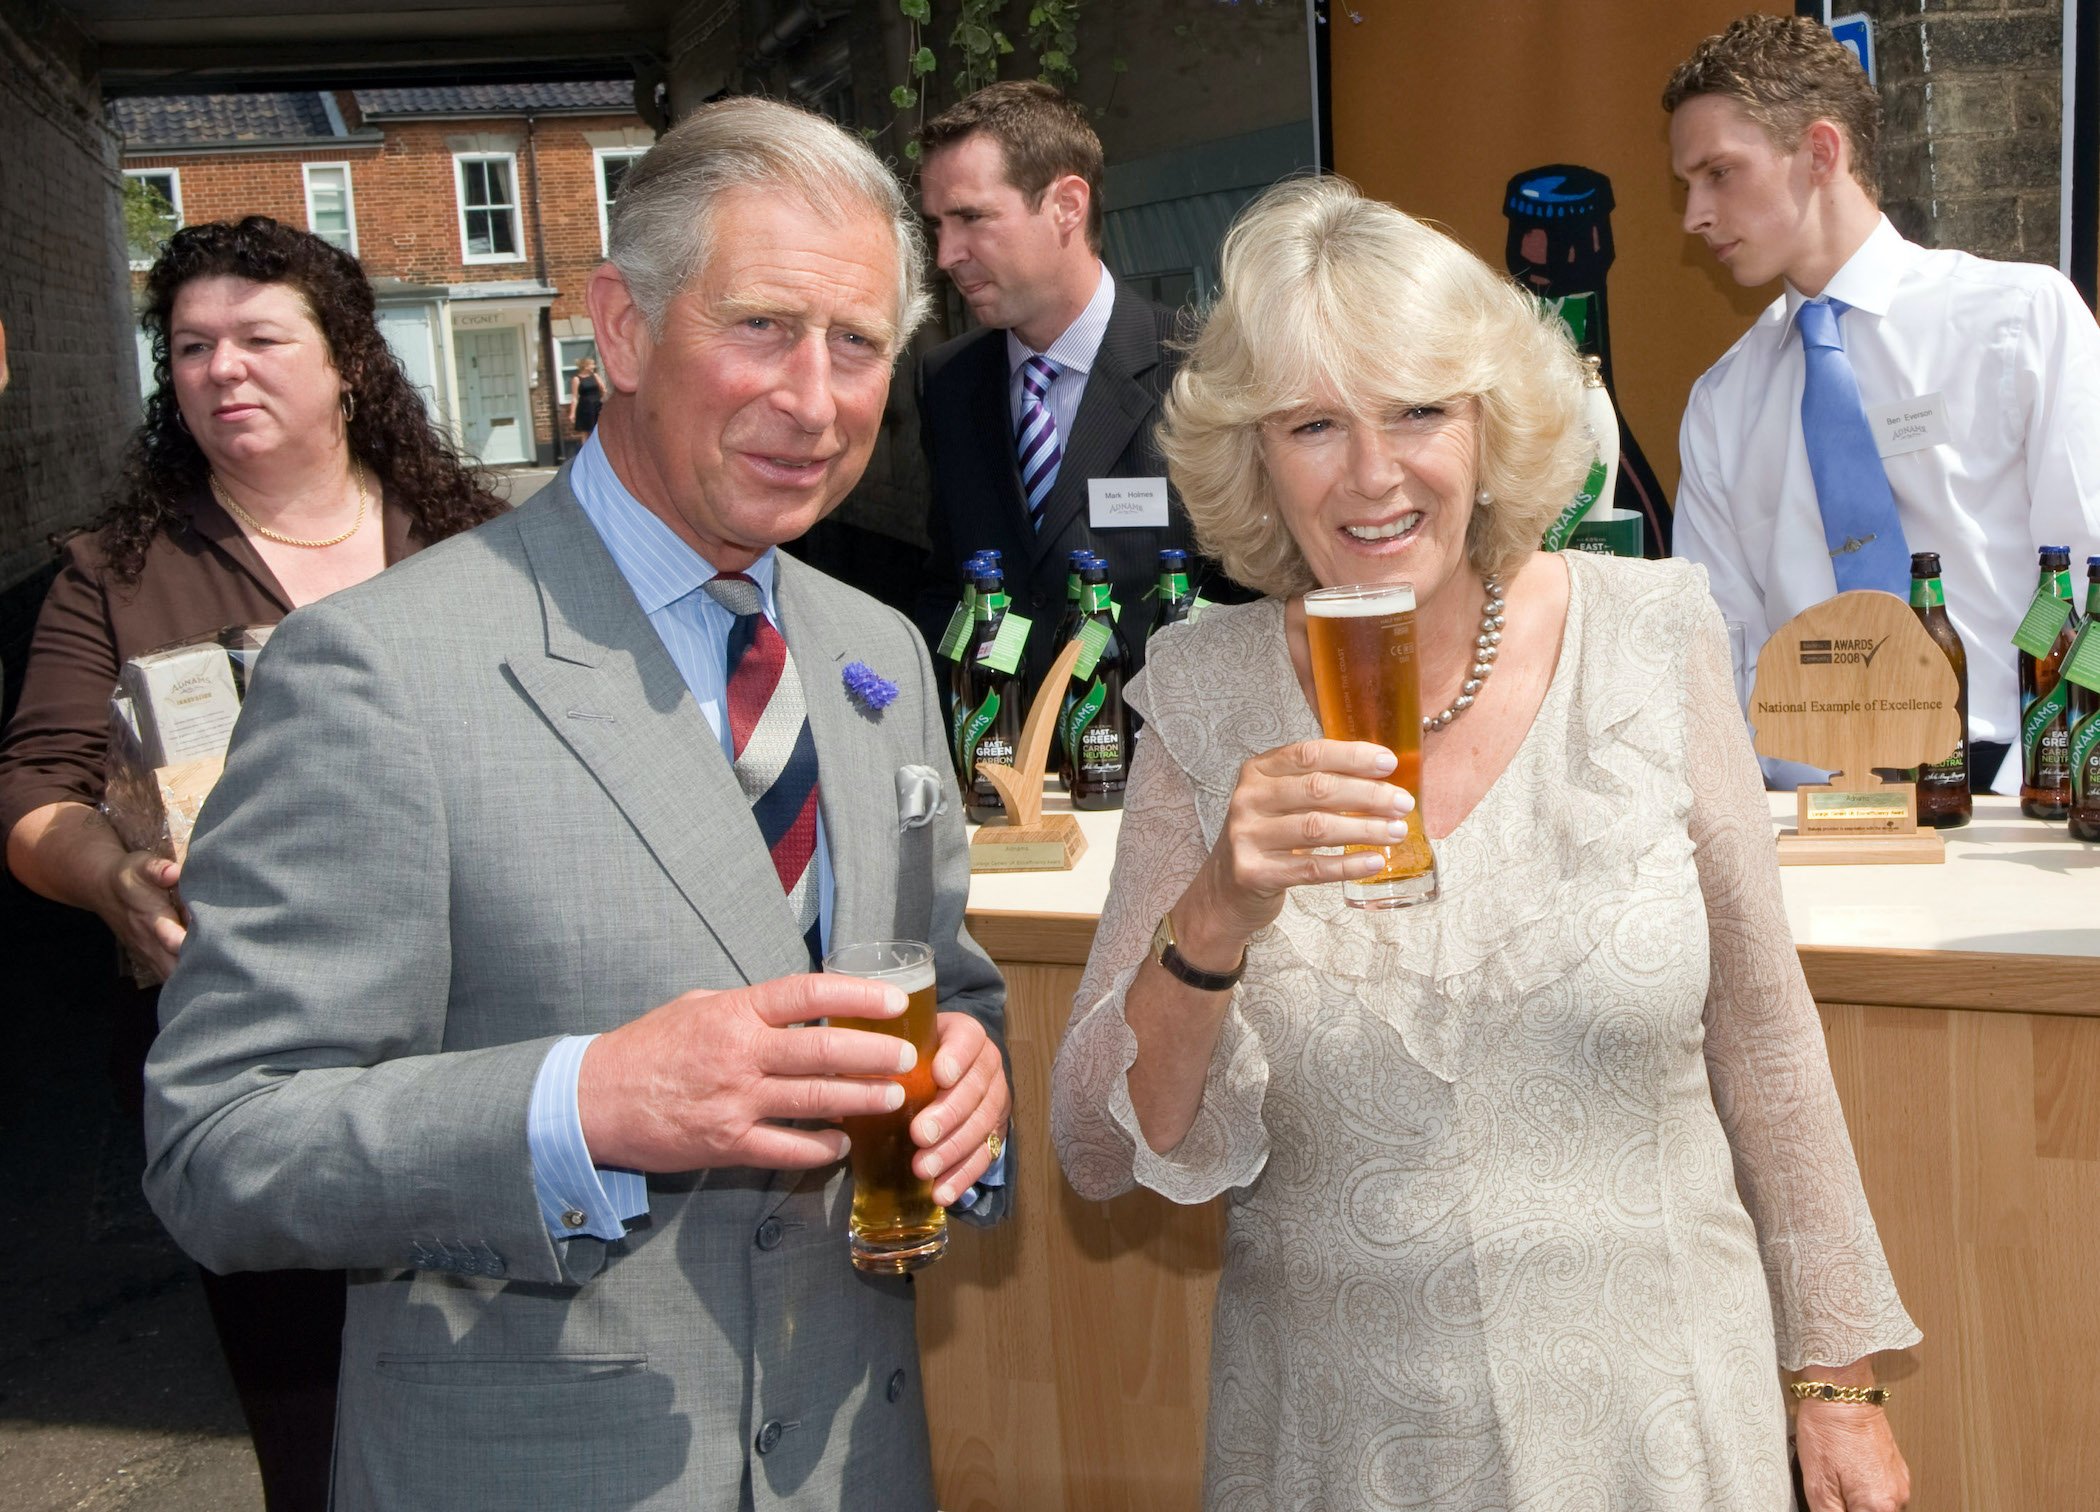 Prince Charles and Camilla Parker Bowles drink beer during a visit Suffolk